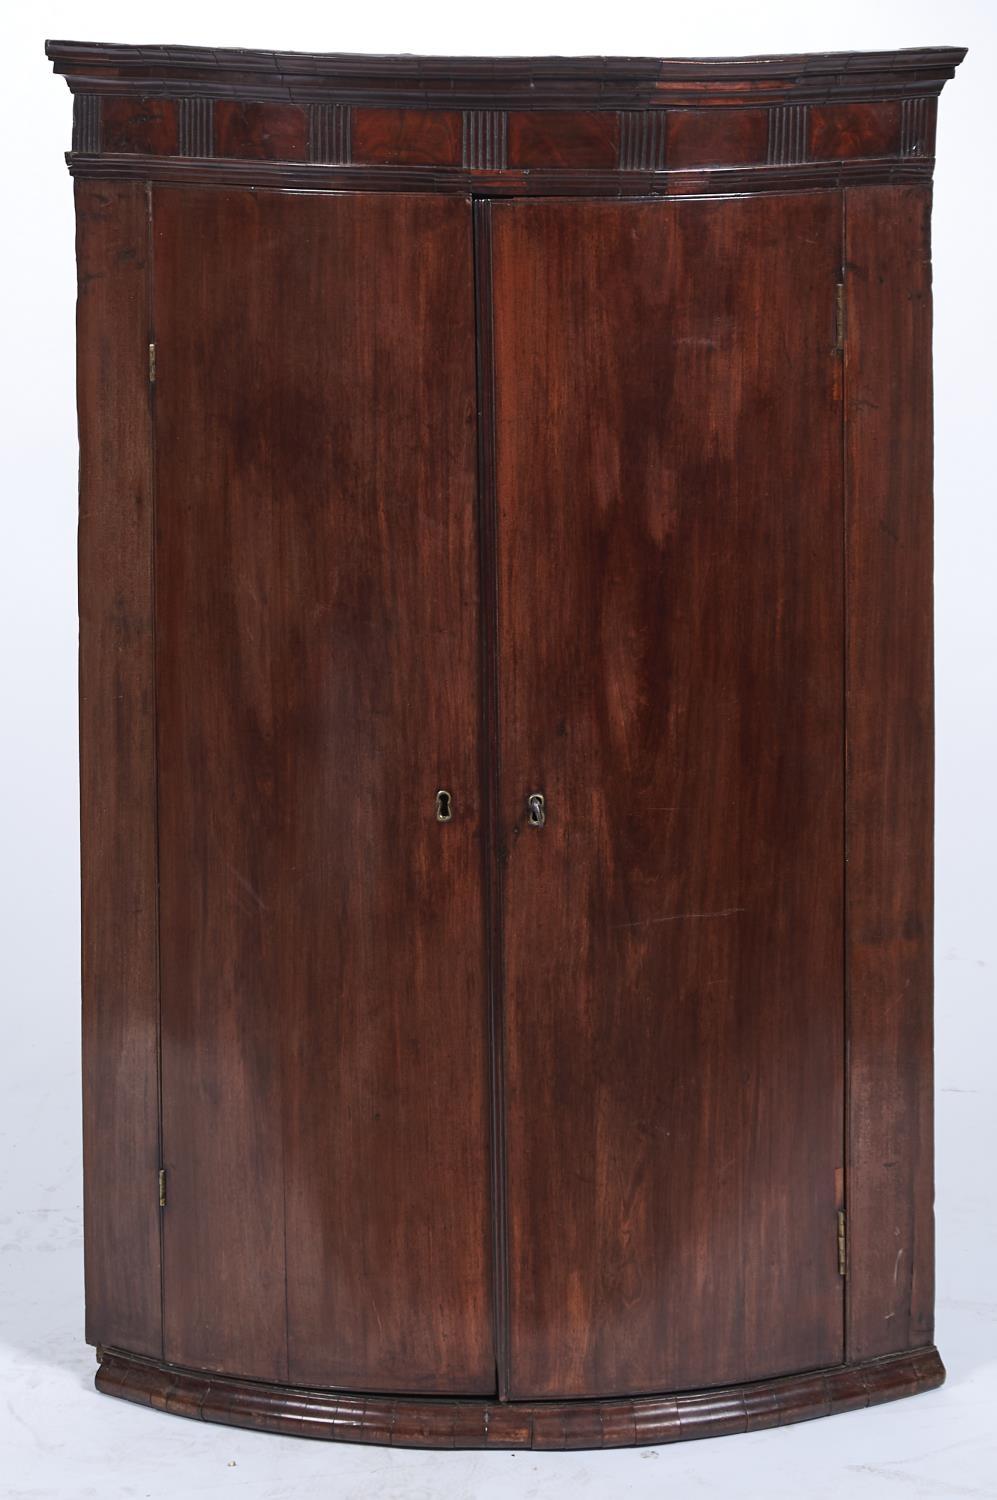 A GEORGE III MAHOGANY HANGING CORNER CUPBOARD, C1780, THE CAVETTO MOULDED CORNICE ABOVE A FLUTED